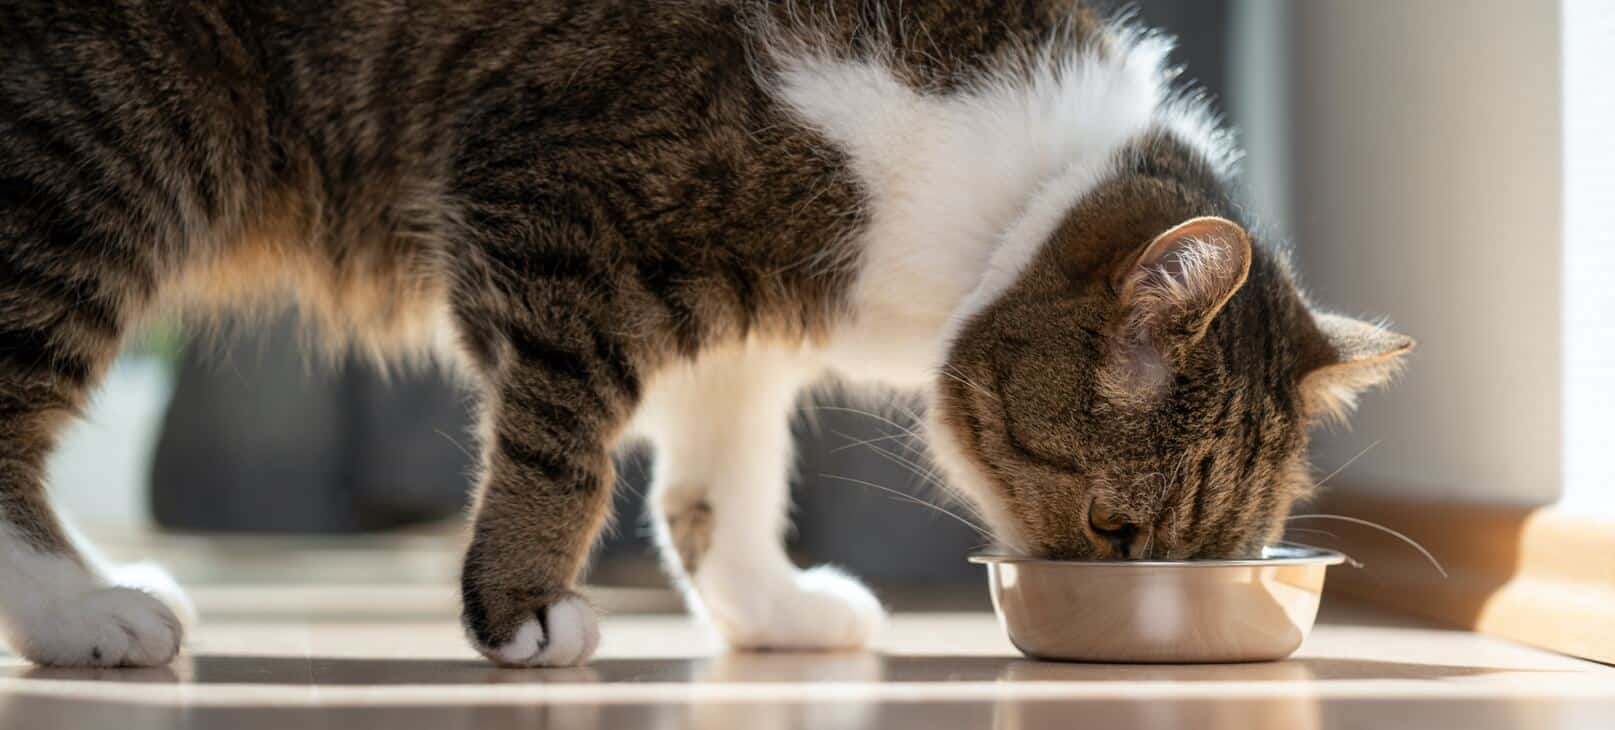 close-up-of-cat-eating-out-of-a-food-bowl-on-the-floor